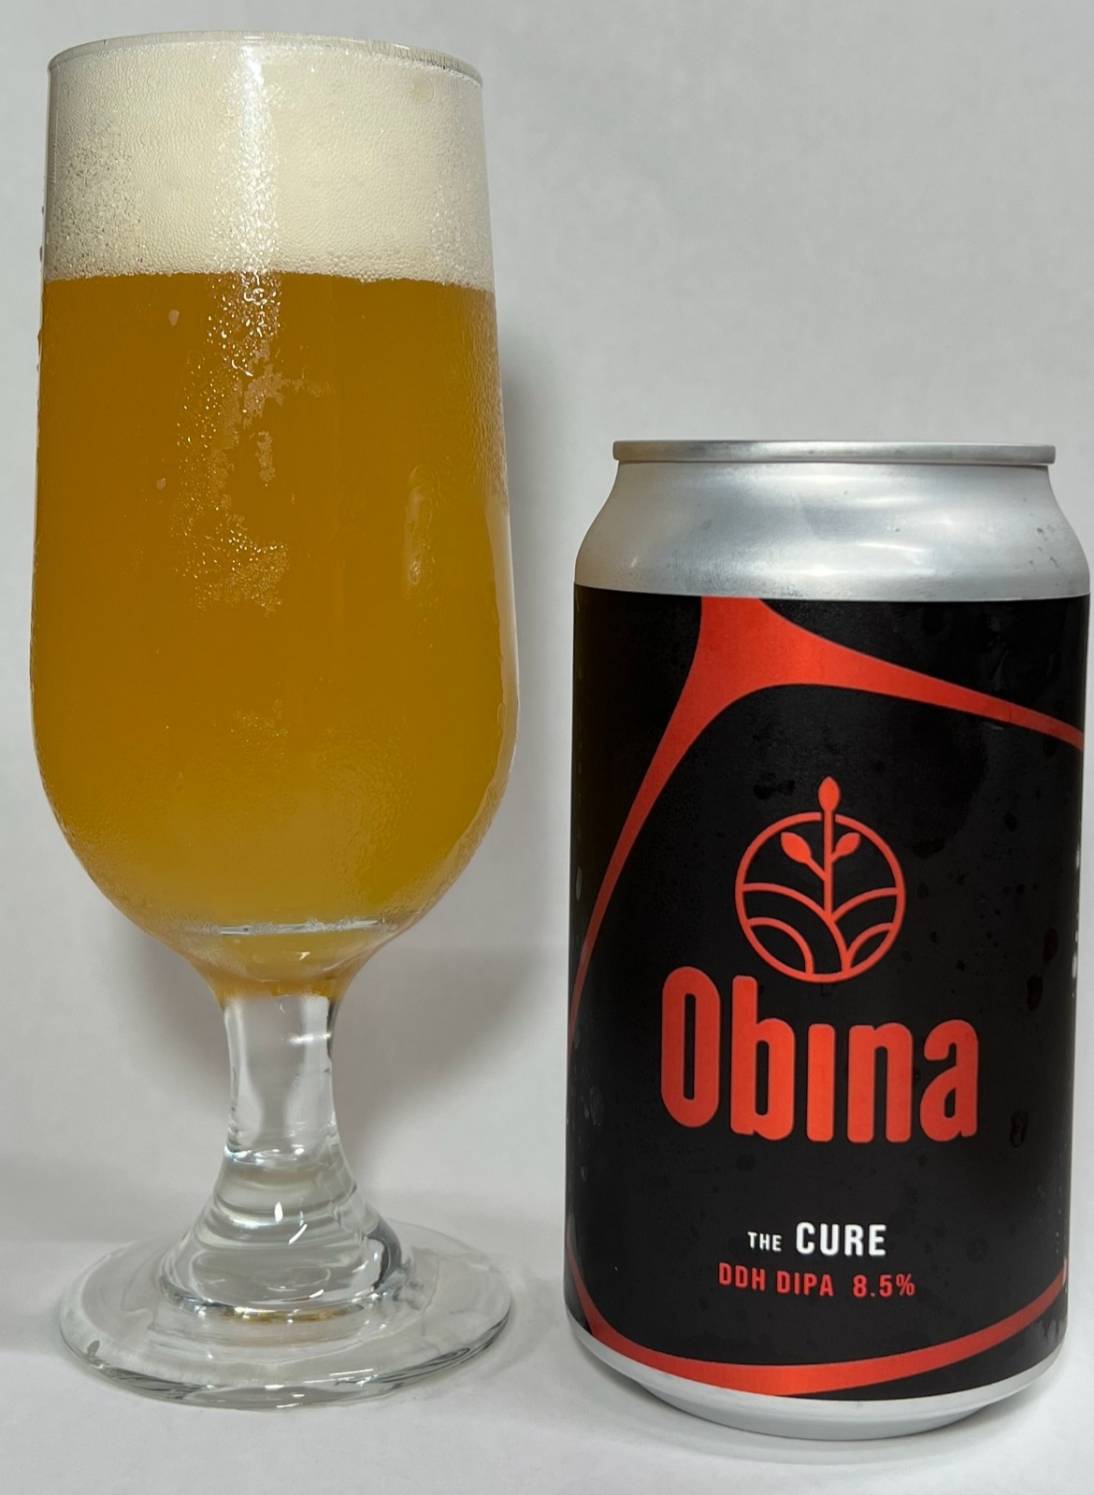 Double IPA "the Cure"